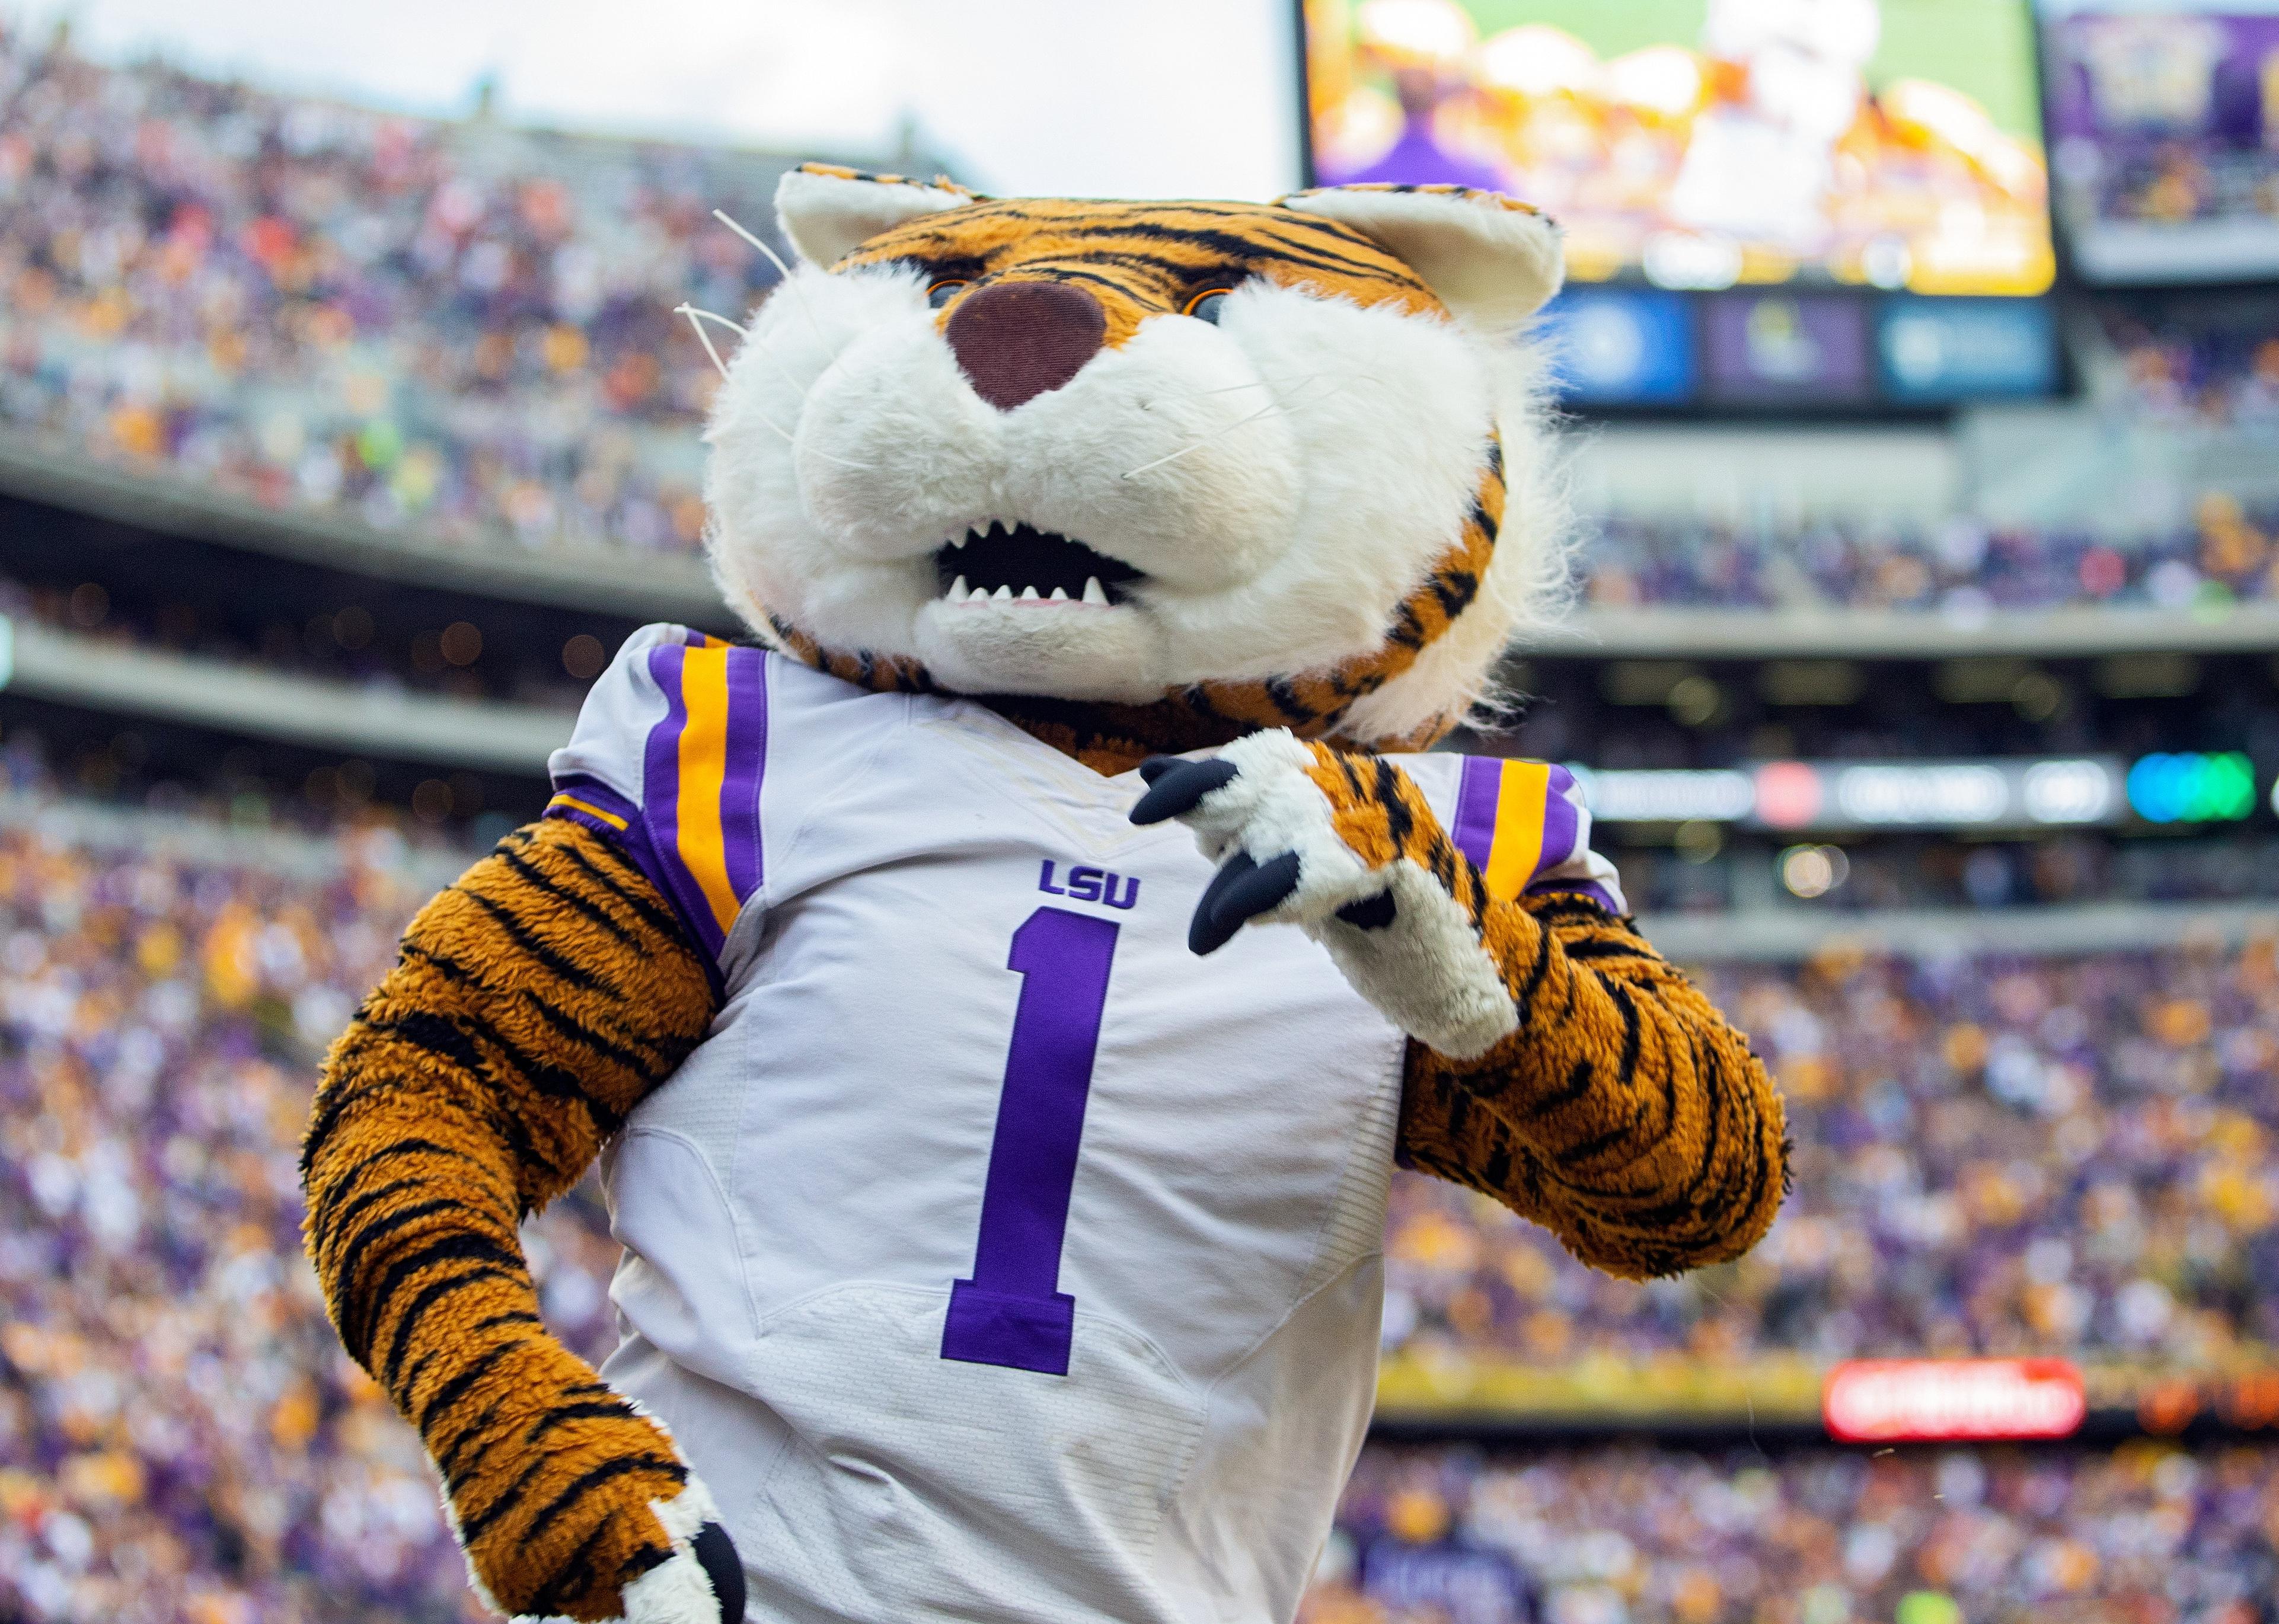 The costumed Mike the Tiger entertains the crowd during a game between the LSU Tigers and the Auburn Tigers.